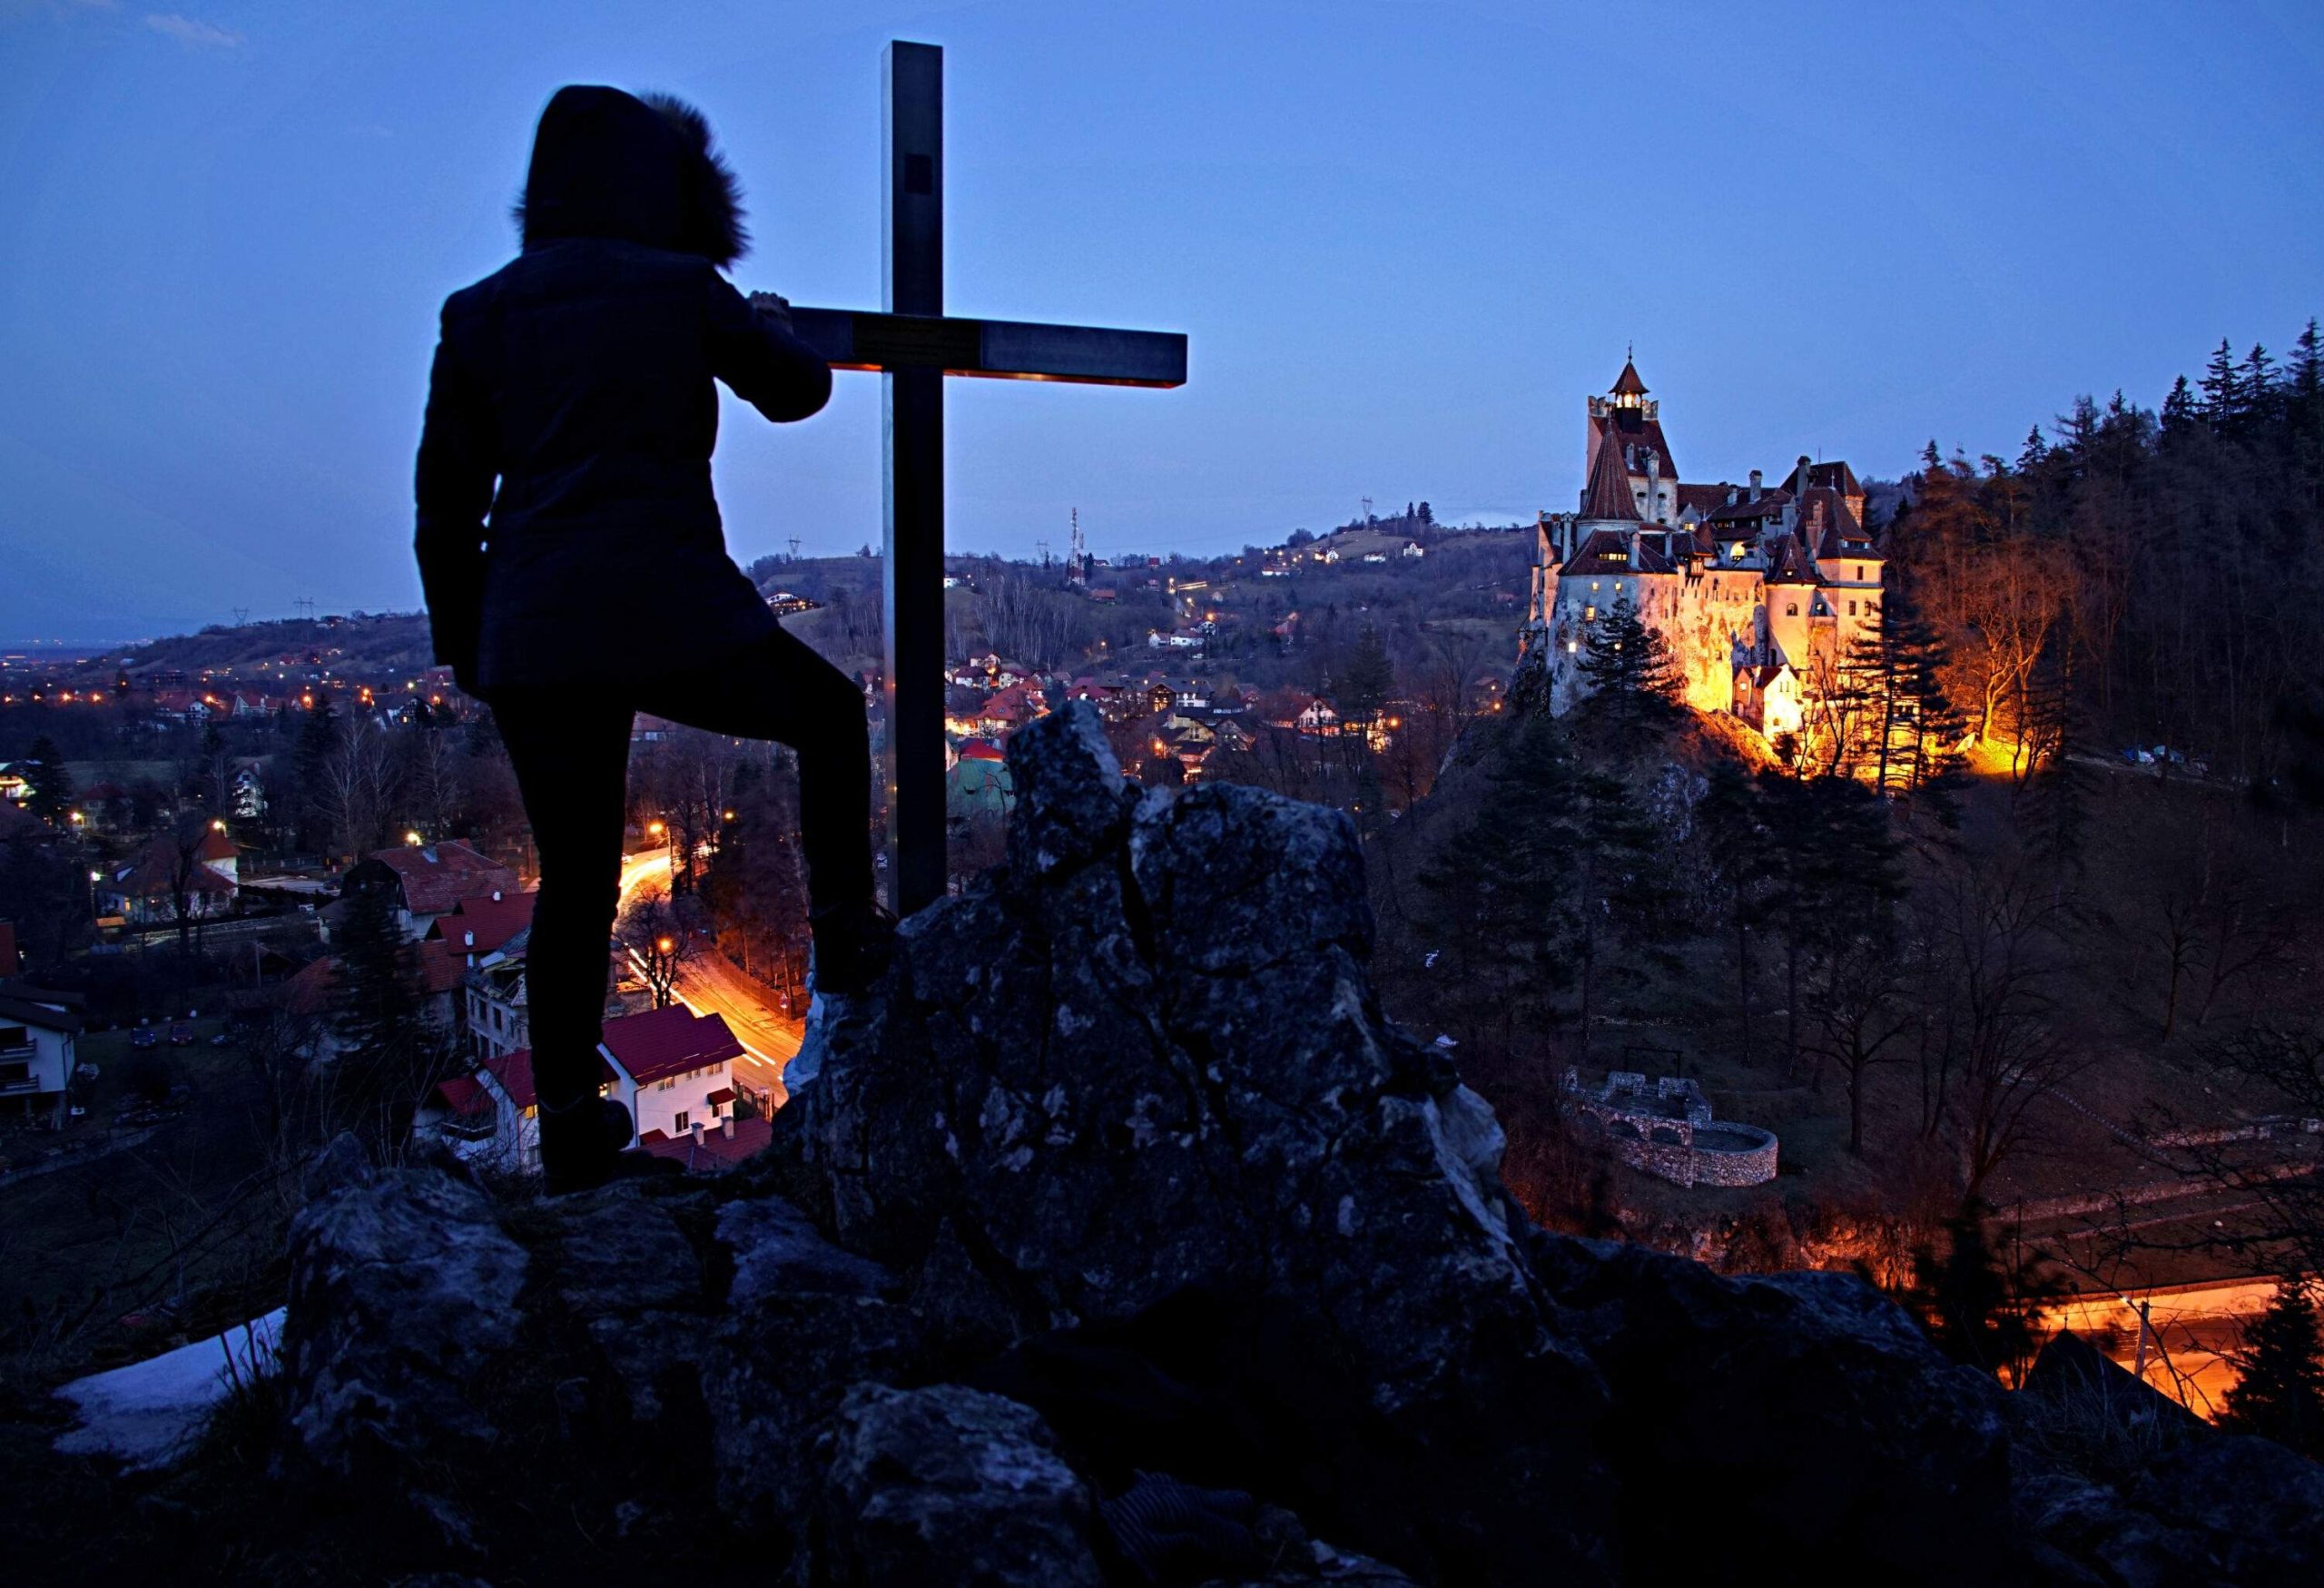 A silhouette of a person standing next to a cross embedded in a rock, with a distant view of an illuminated castle.